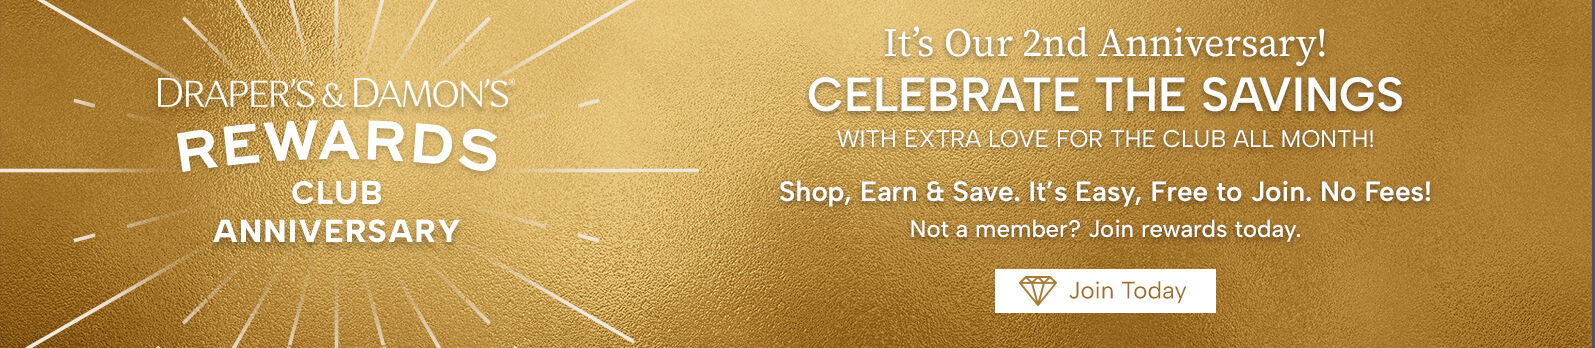 draper's & damon's rewards club anniversary. It's our 2nd anniversary! Celebrate the savings with extra love for the club all month! Shop, earn & save. it's easy, free to join + no fees join today